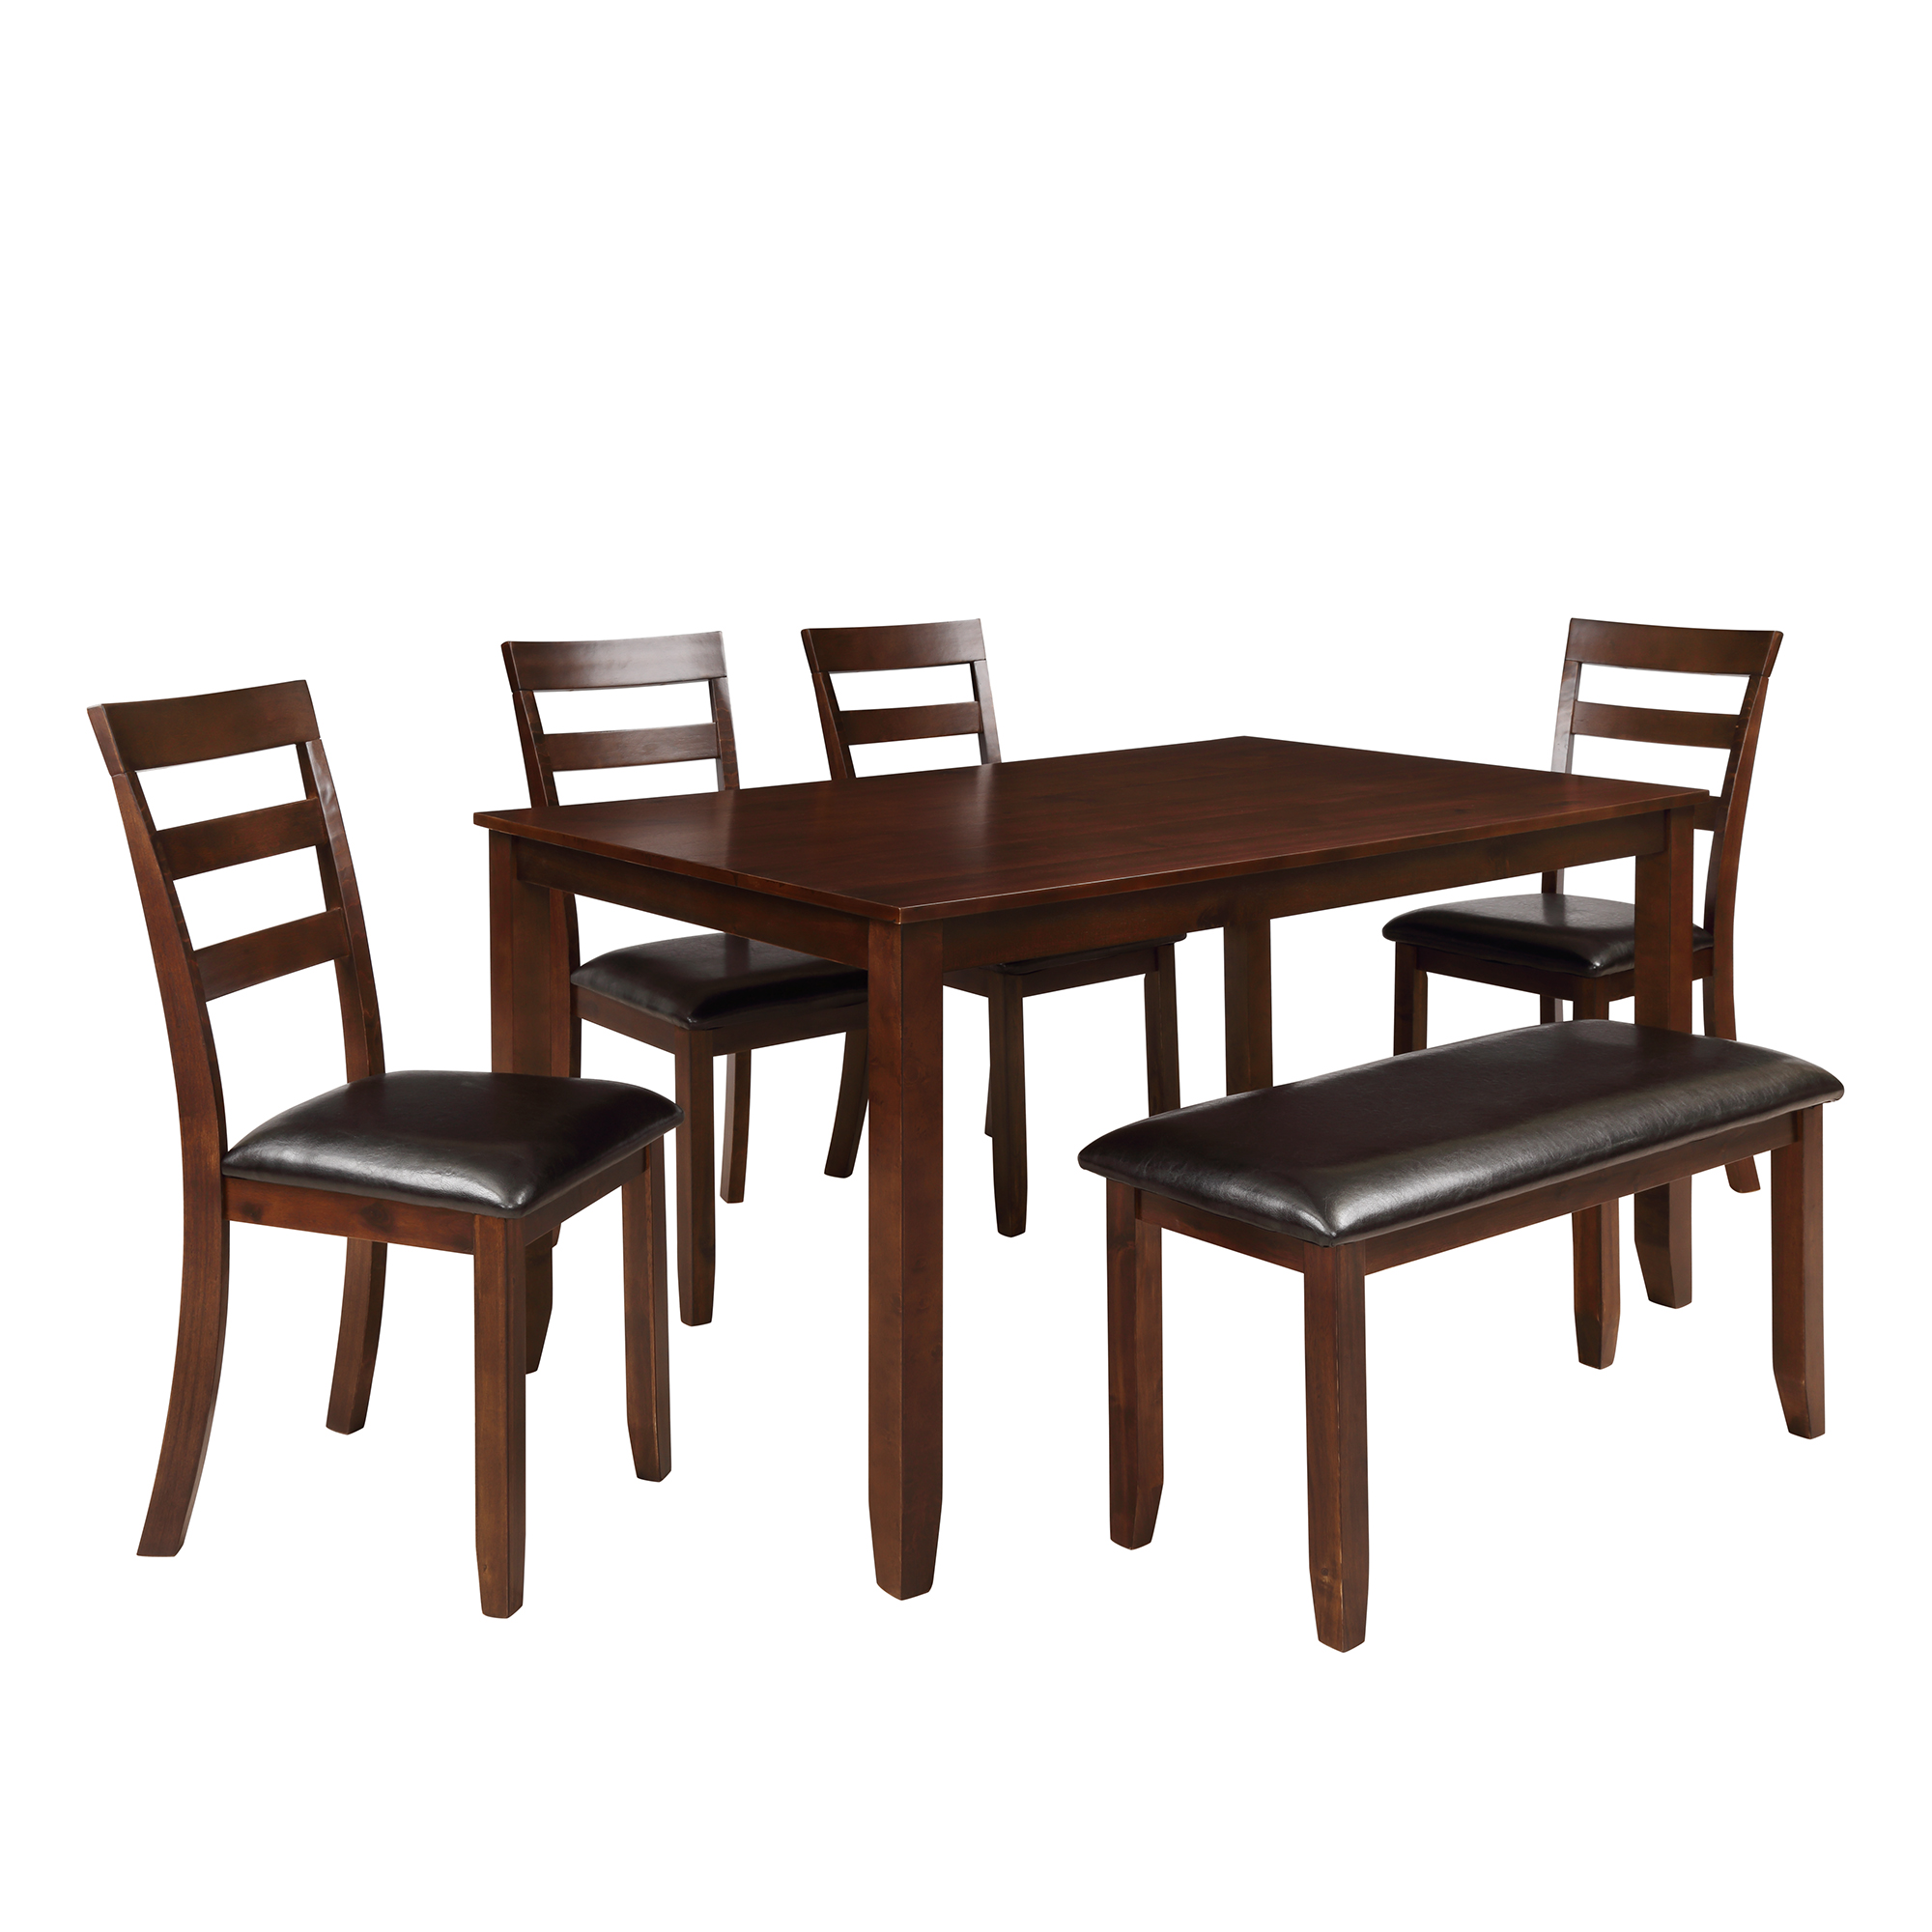 EUROCO 6-Piece Dining Room Table Set with 4 Ladder Chairs and Bench, Brown - image 1 of 7